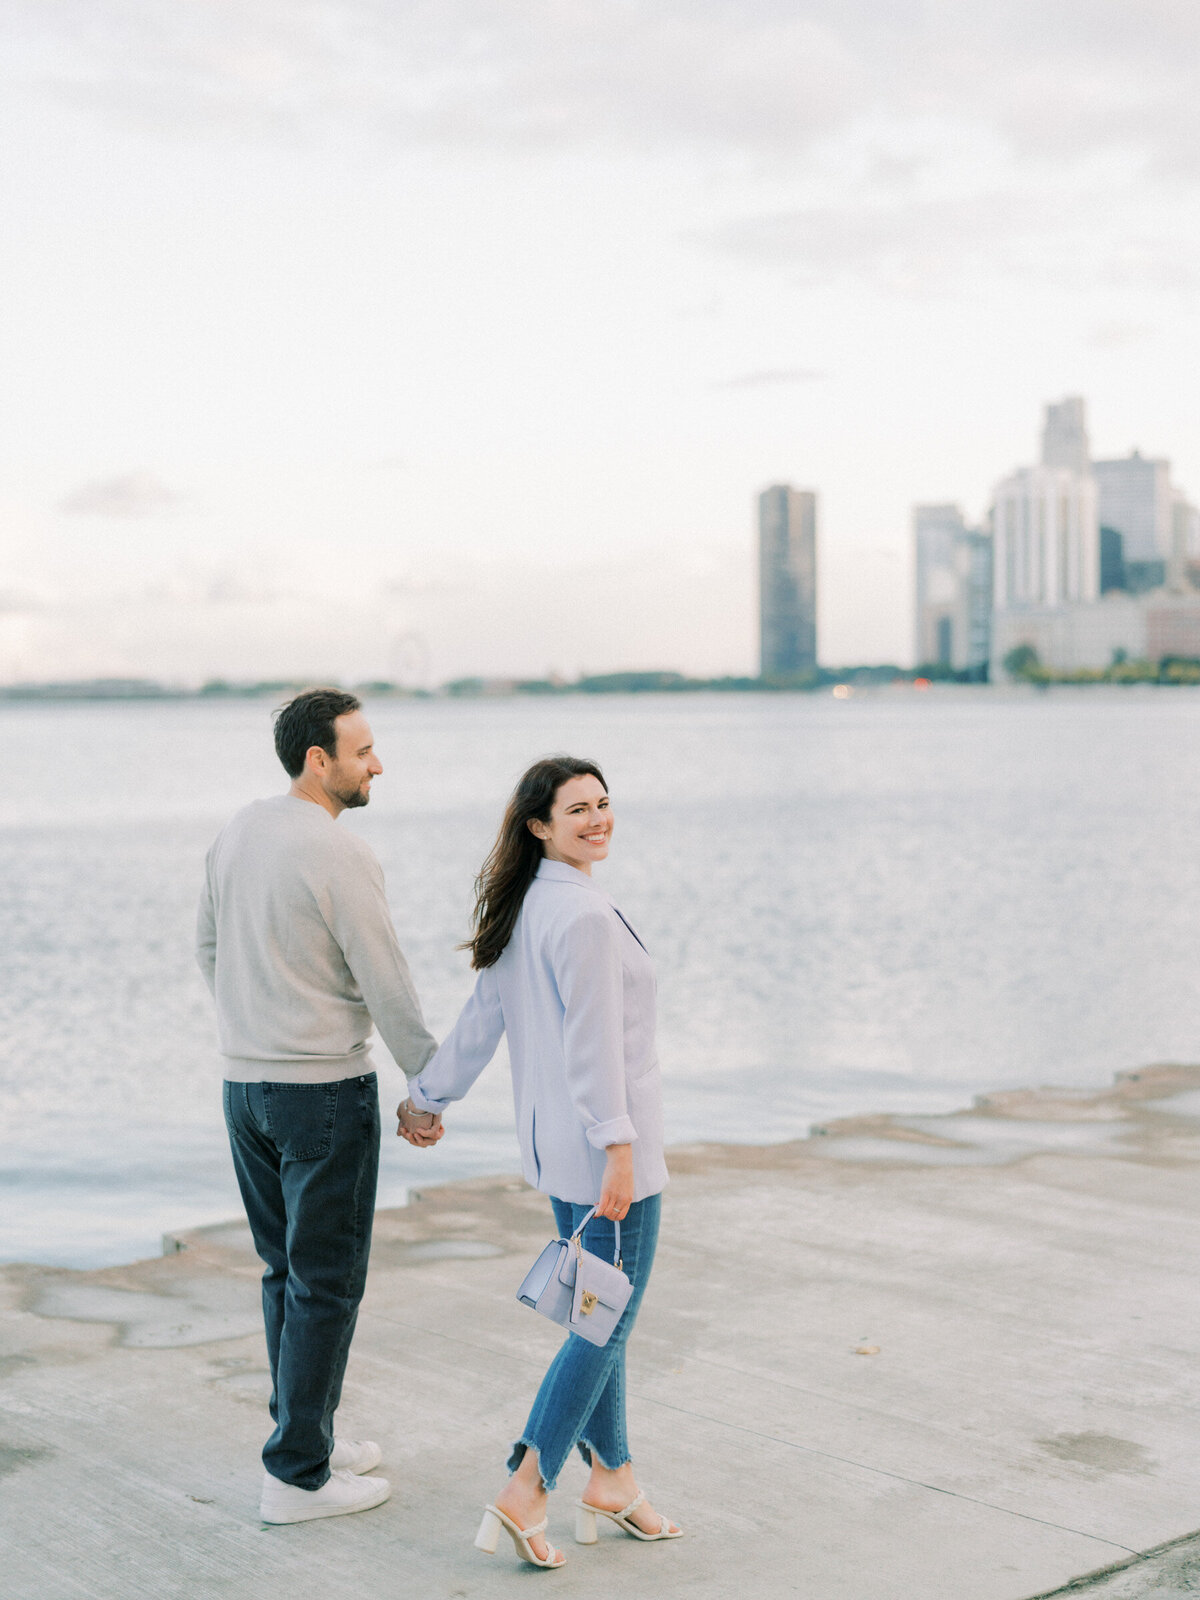 Lincoln Park Chicago Fall Engagement Session Highlights | Amarachi Ikeji Photography 37